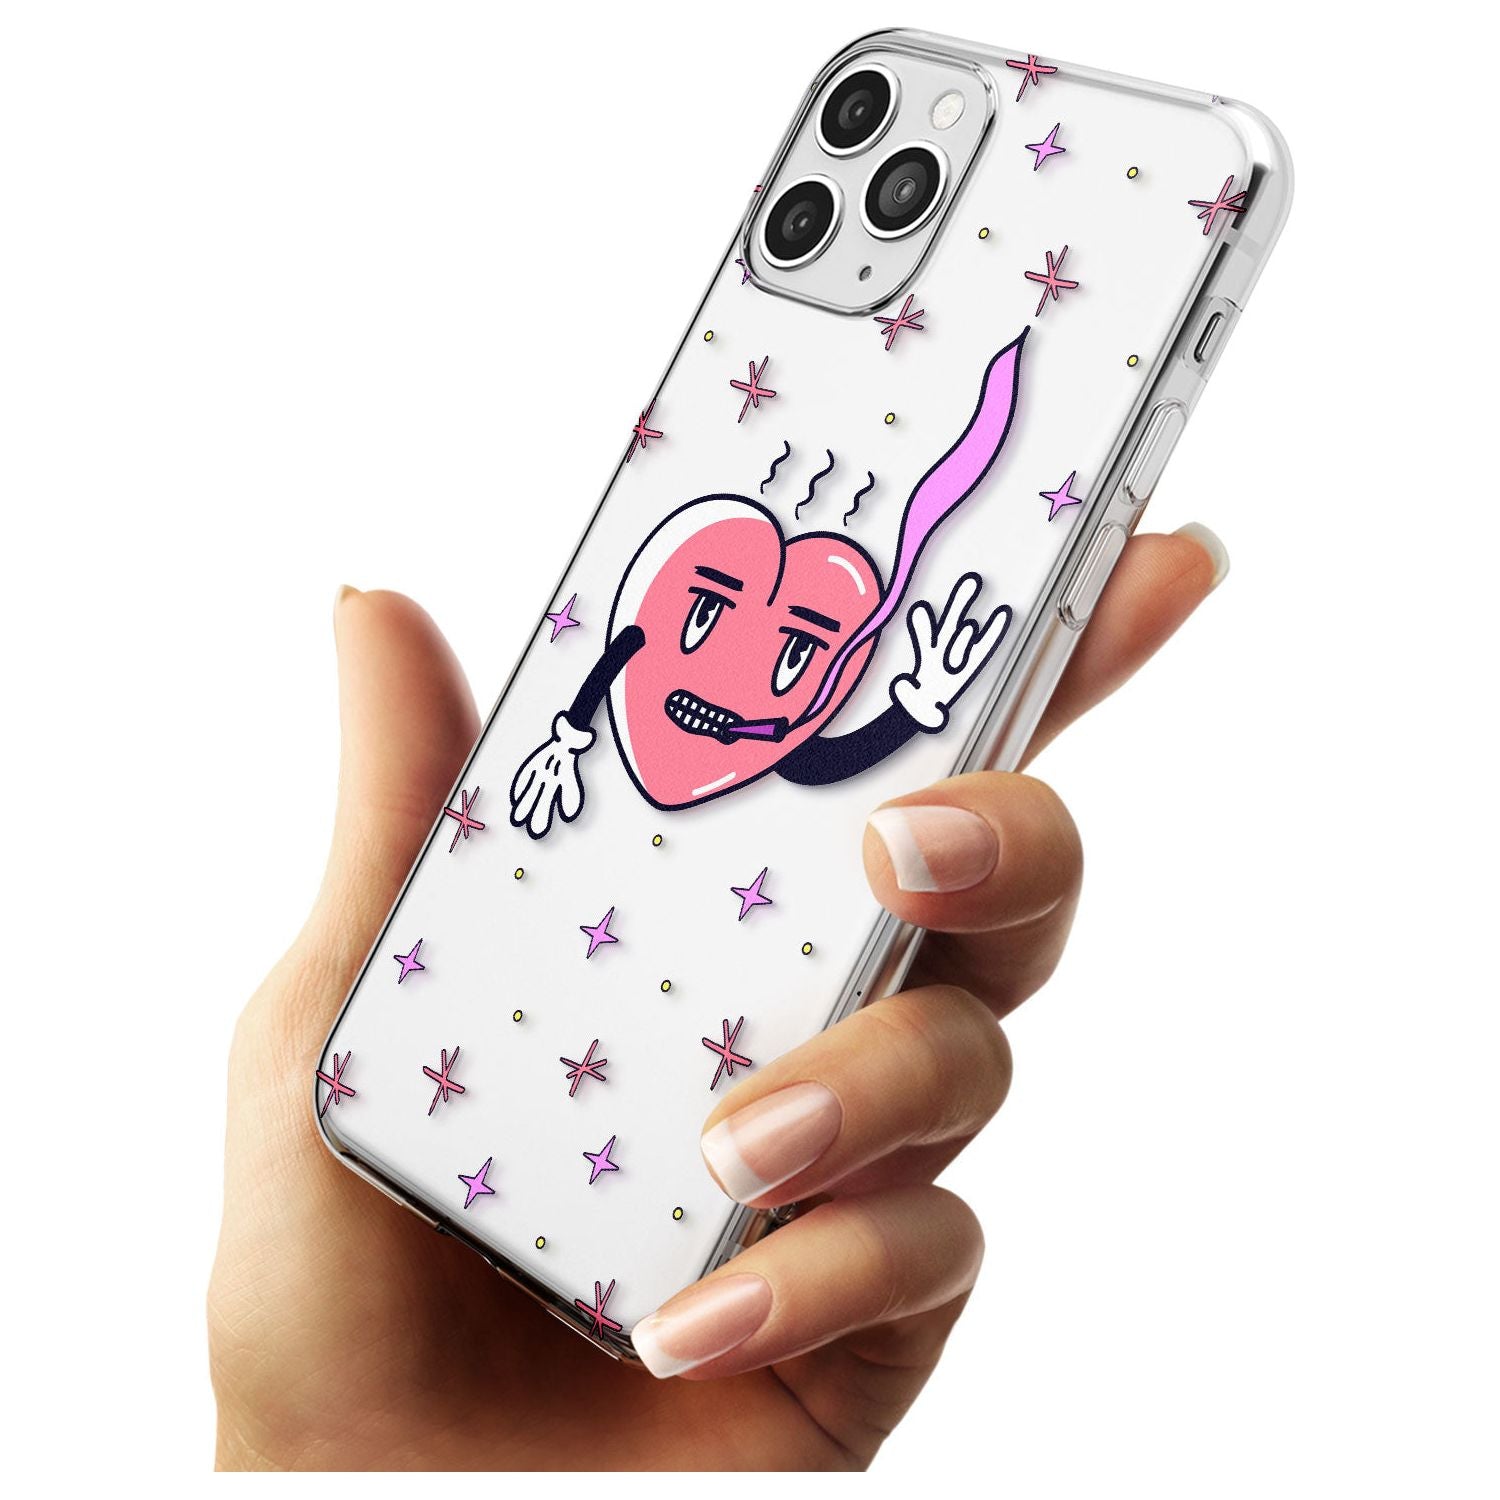 Rock n Roll Heart (Clear) Slim TPU Phone Case for iPhone 11 Pro Max